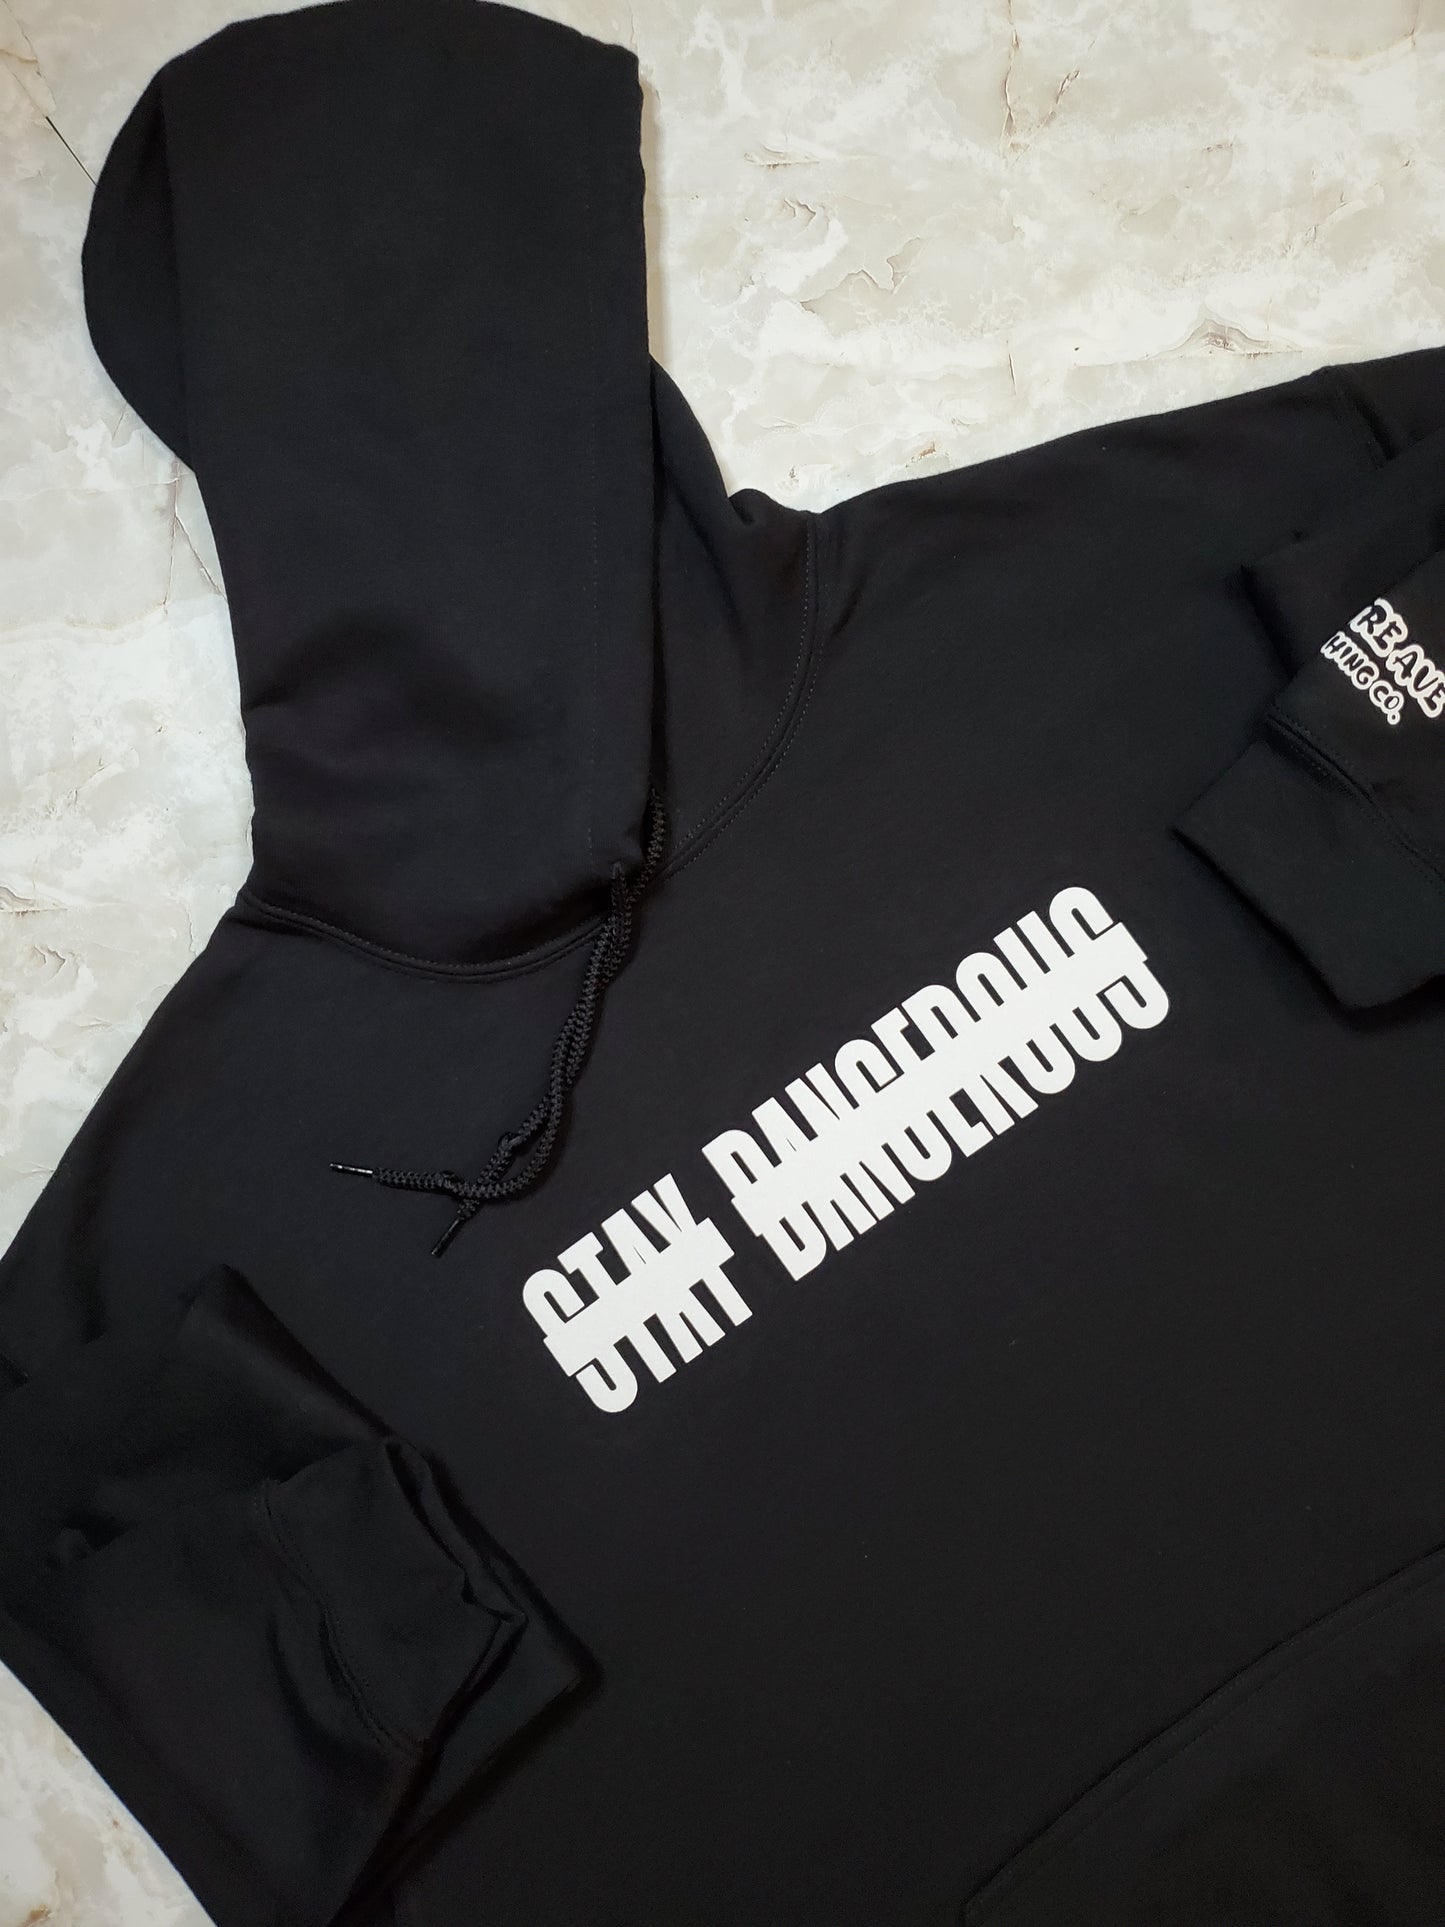 Stay Dangerous Hoodie - Centre Ave Clothing Co.